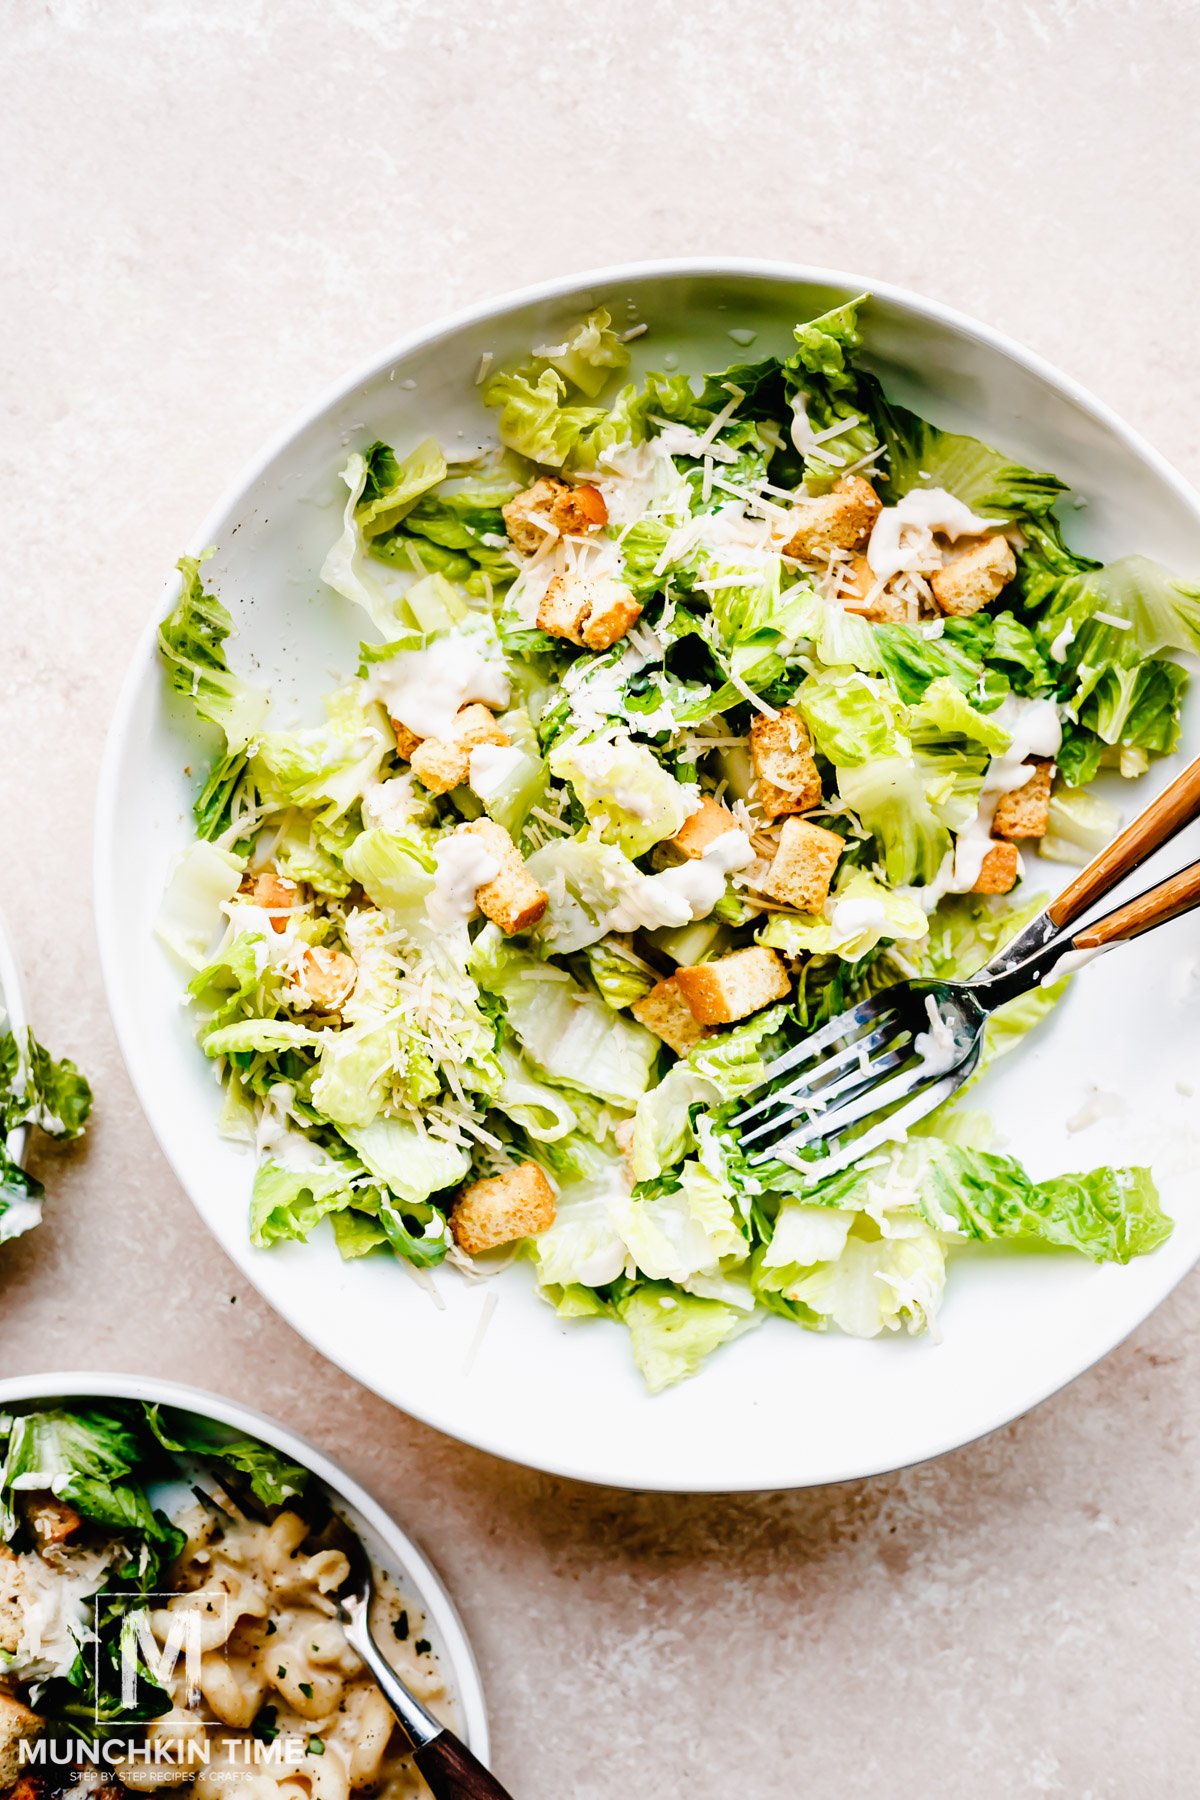 Best Caesar Salad Recipe with Salad Dressing from Scratch inside the salad bowl.